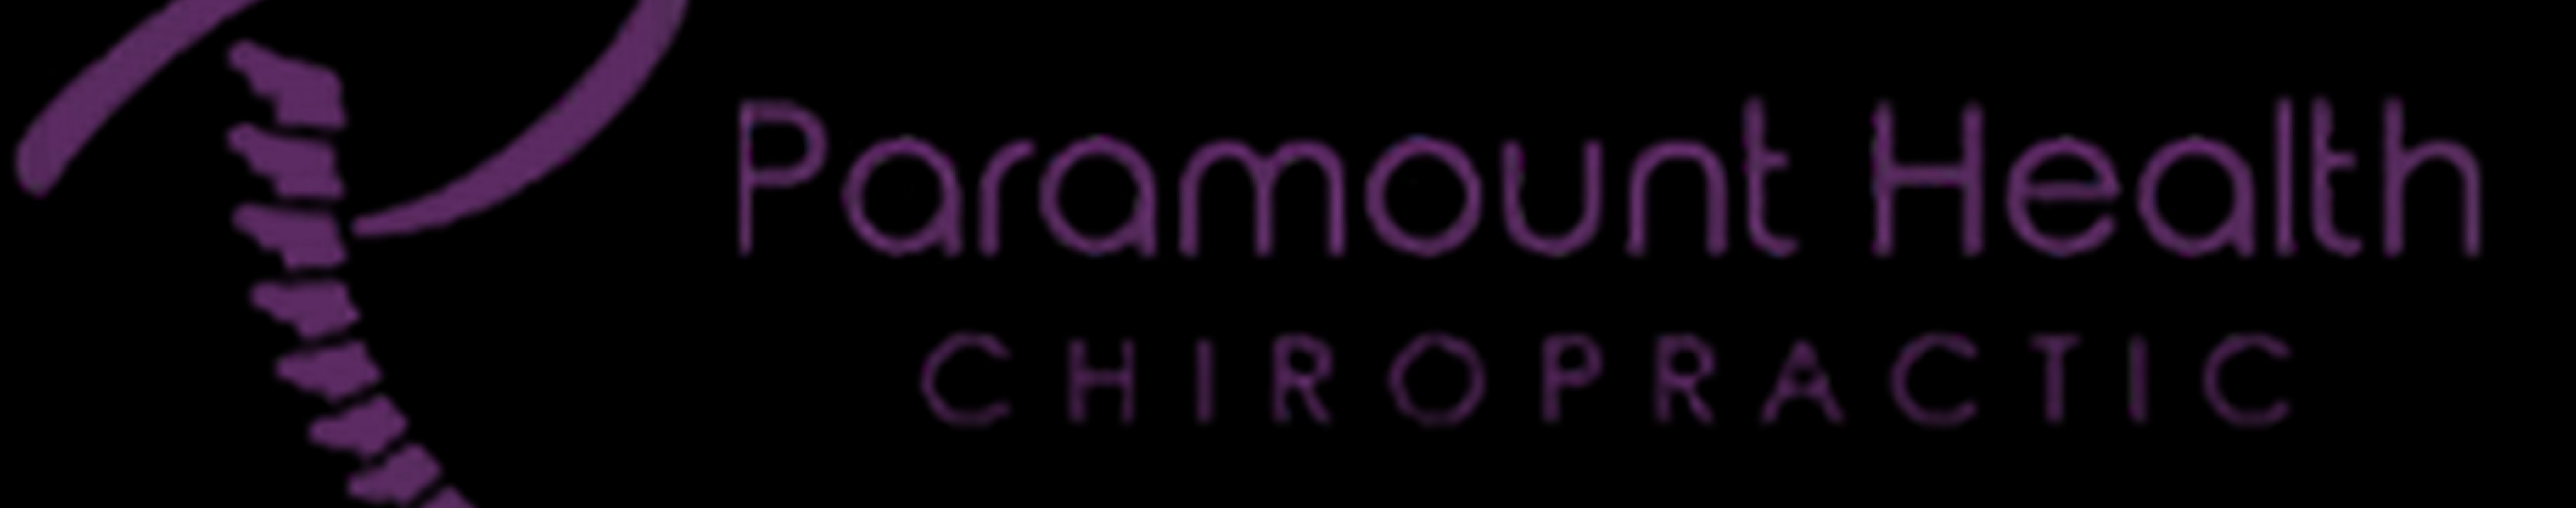 Paramount Health Chiropractic's profile banner